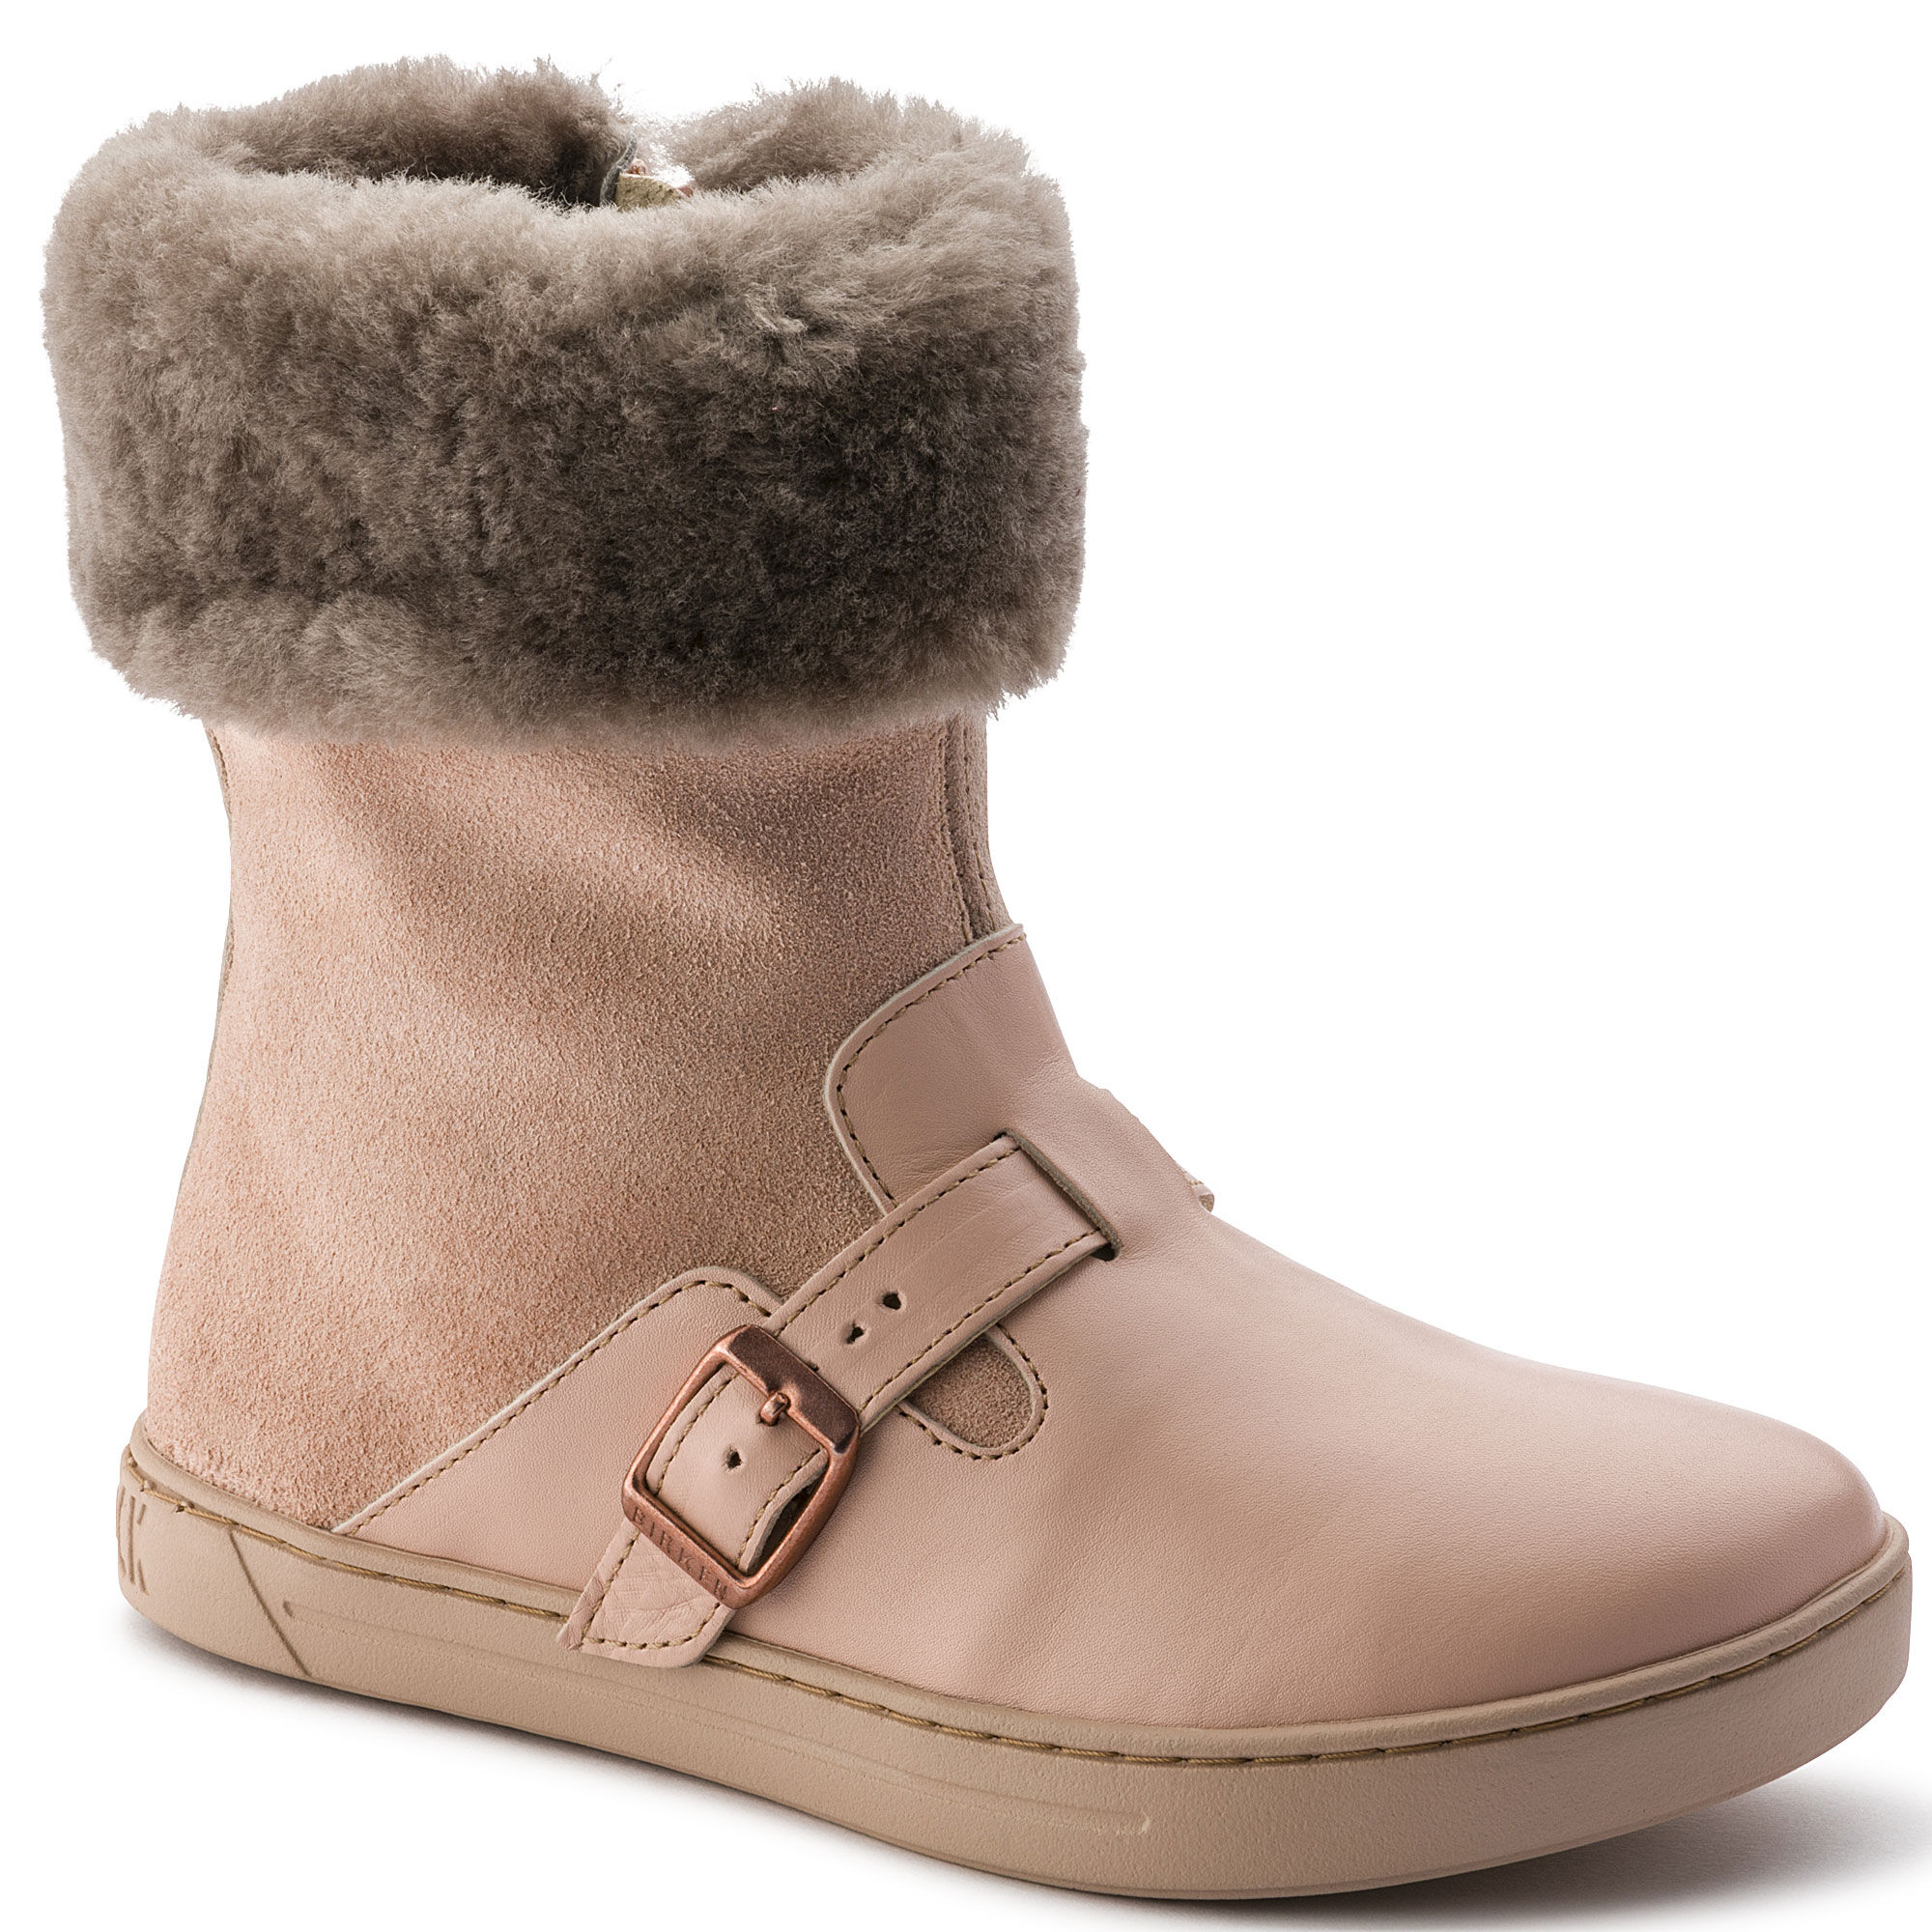 birkenstock womens stirling shearling lined boot